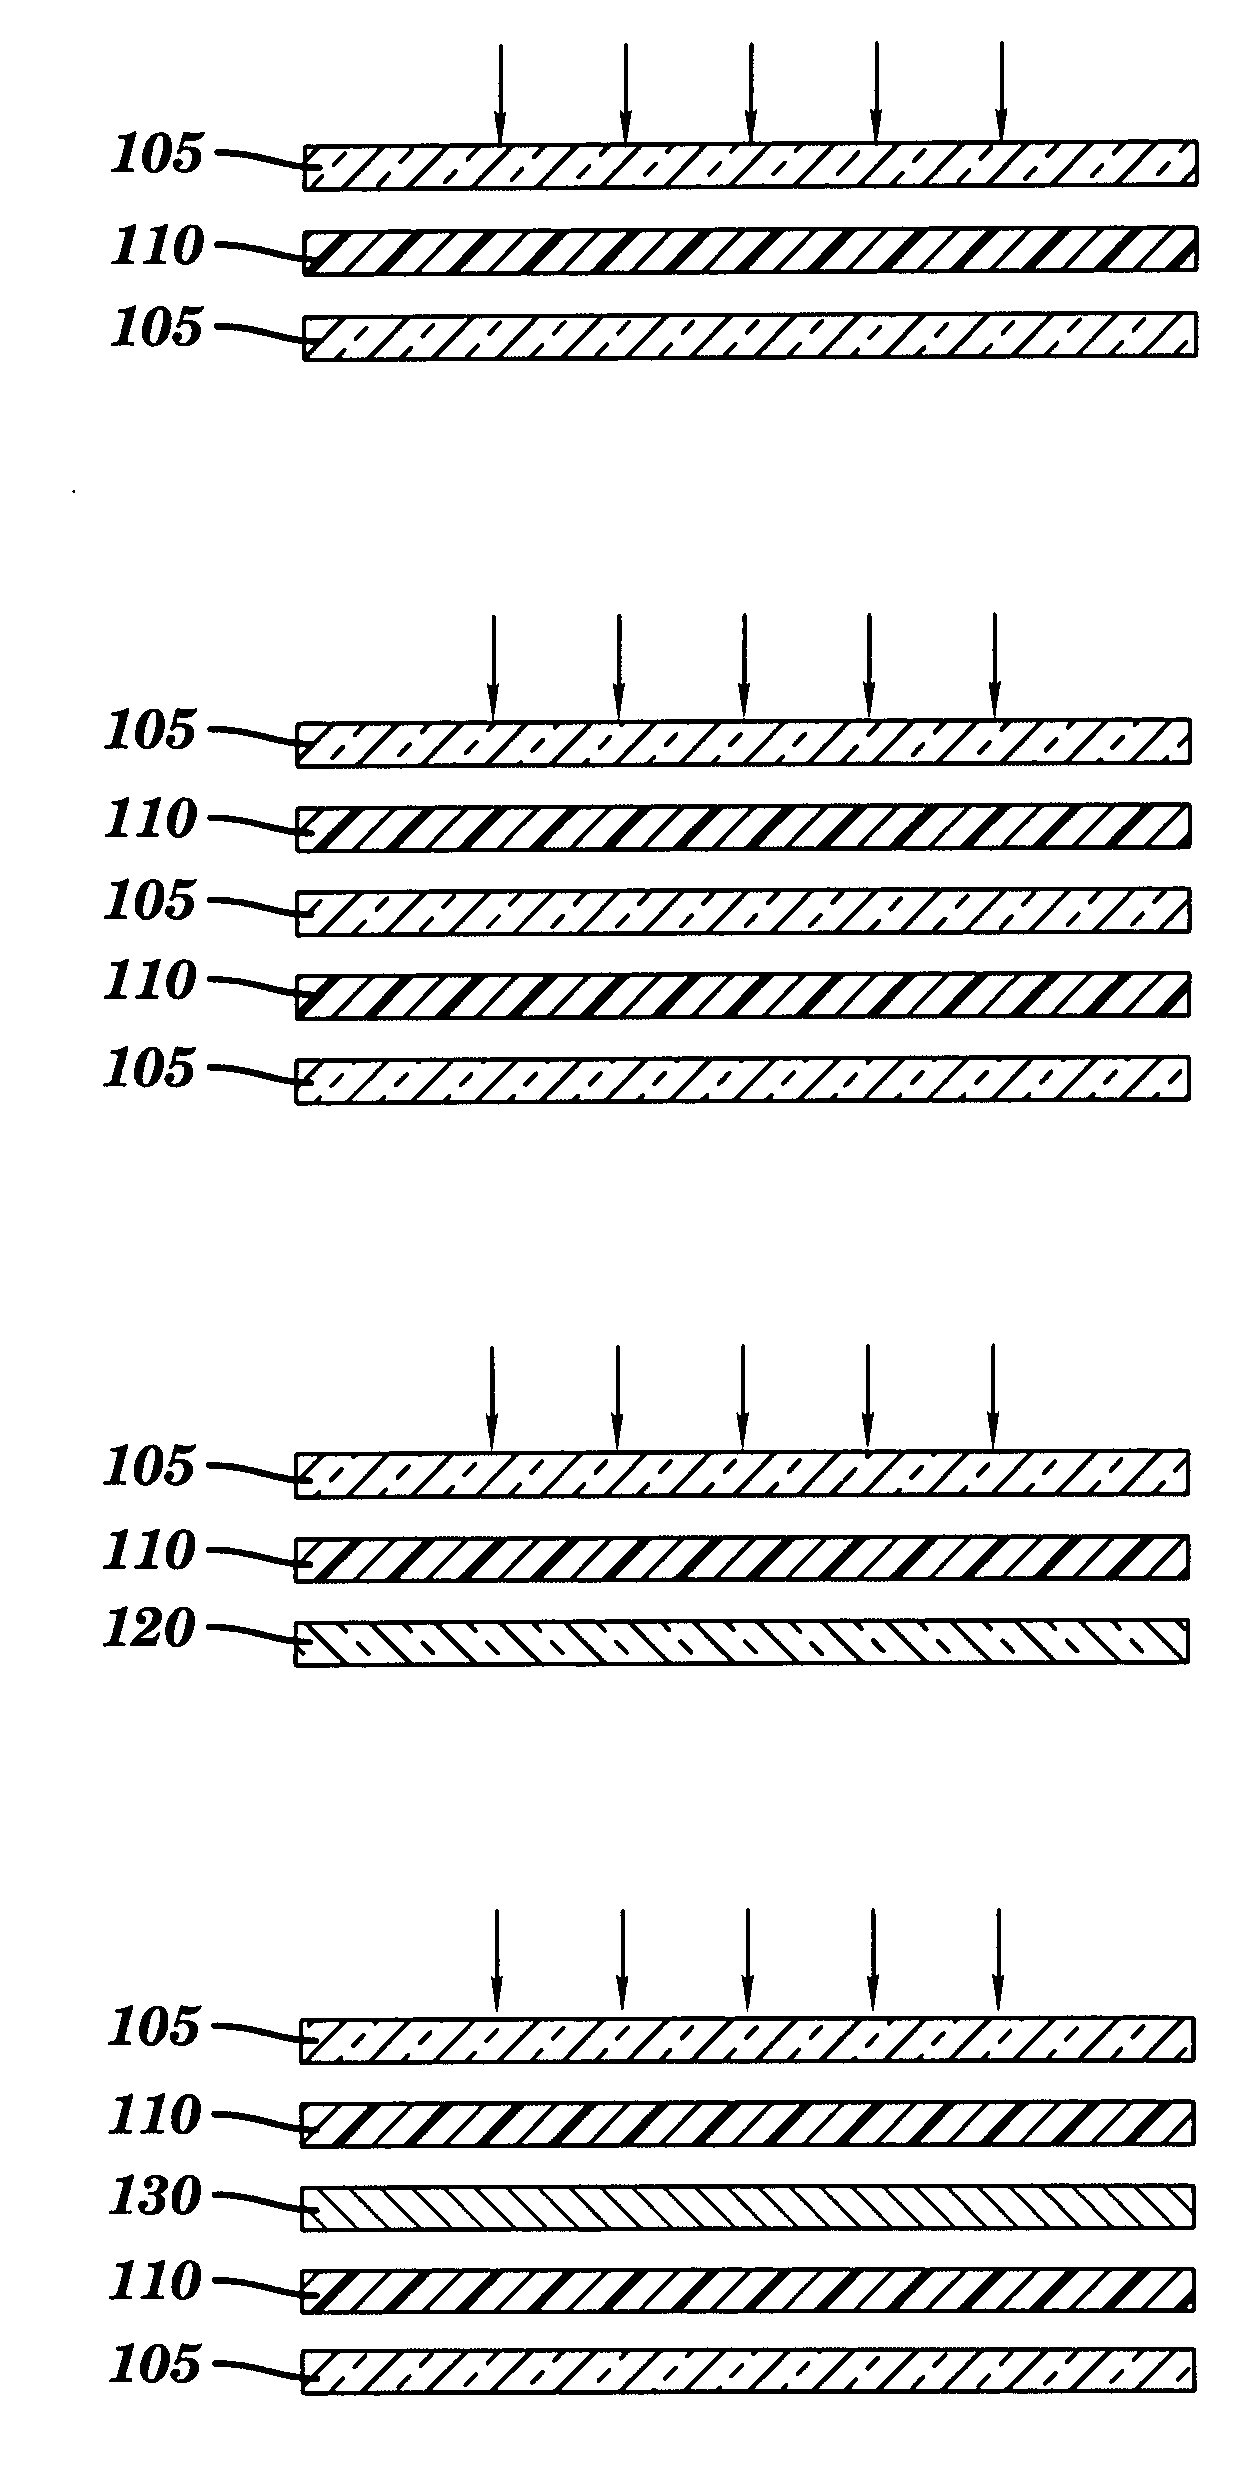 Method of lamination using radio frequency heating and pressure